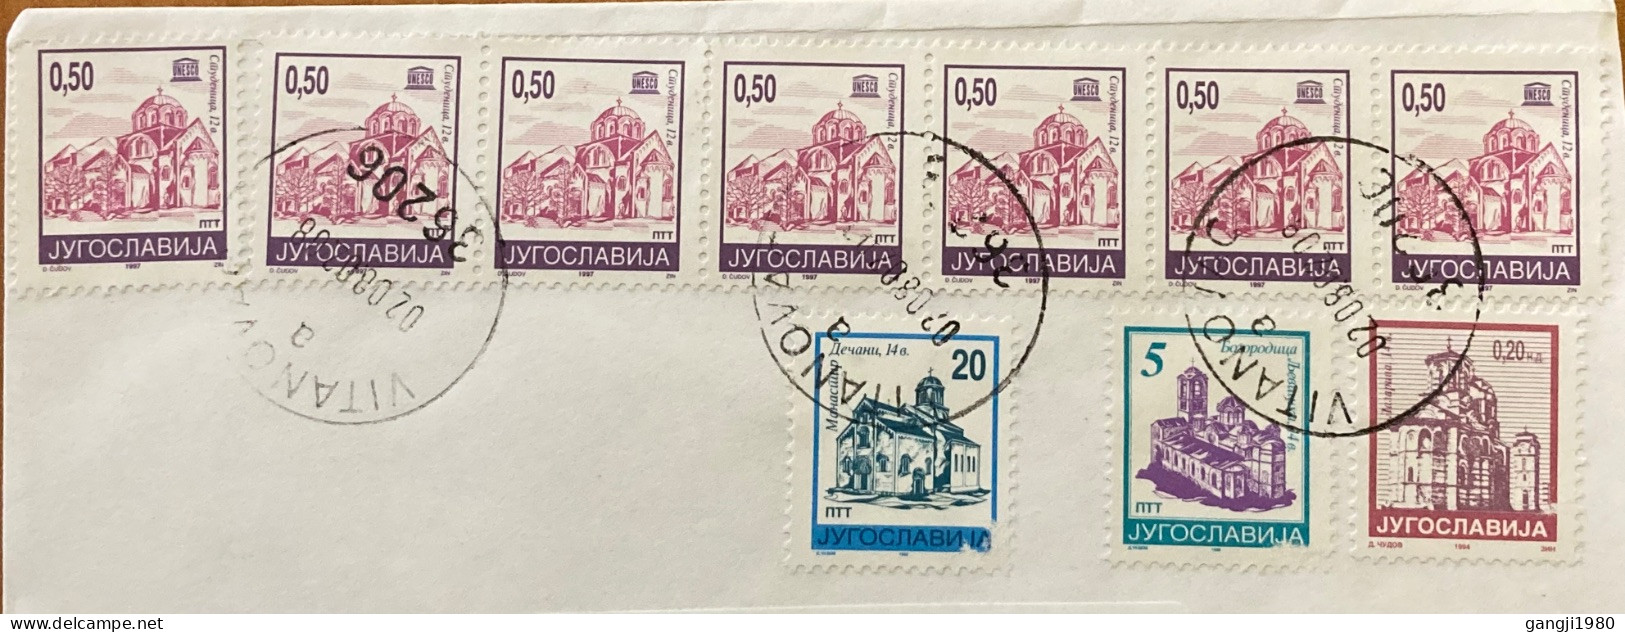 YUGOSLOVAKIA 1997 COVER USED TO USA, ARCHITECTURE BUILDING HERITAGE, CHURCH MULTI 10 STAMPS,VITANOVAC TOWN CANCEL. - Covers & Documents